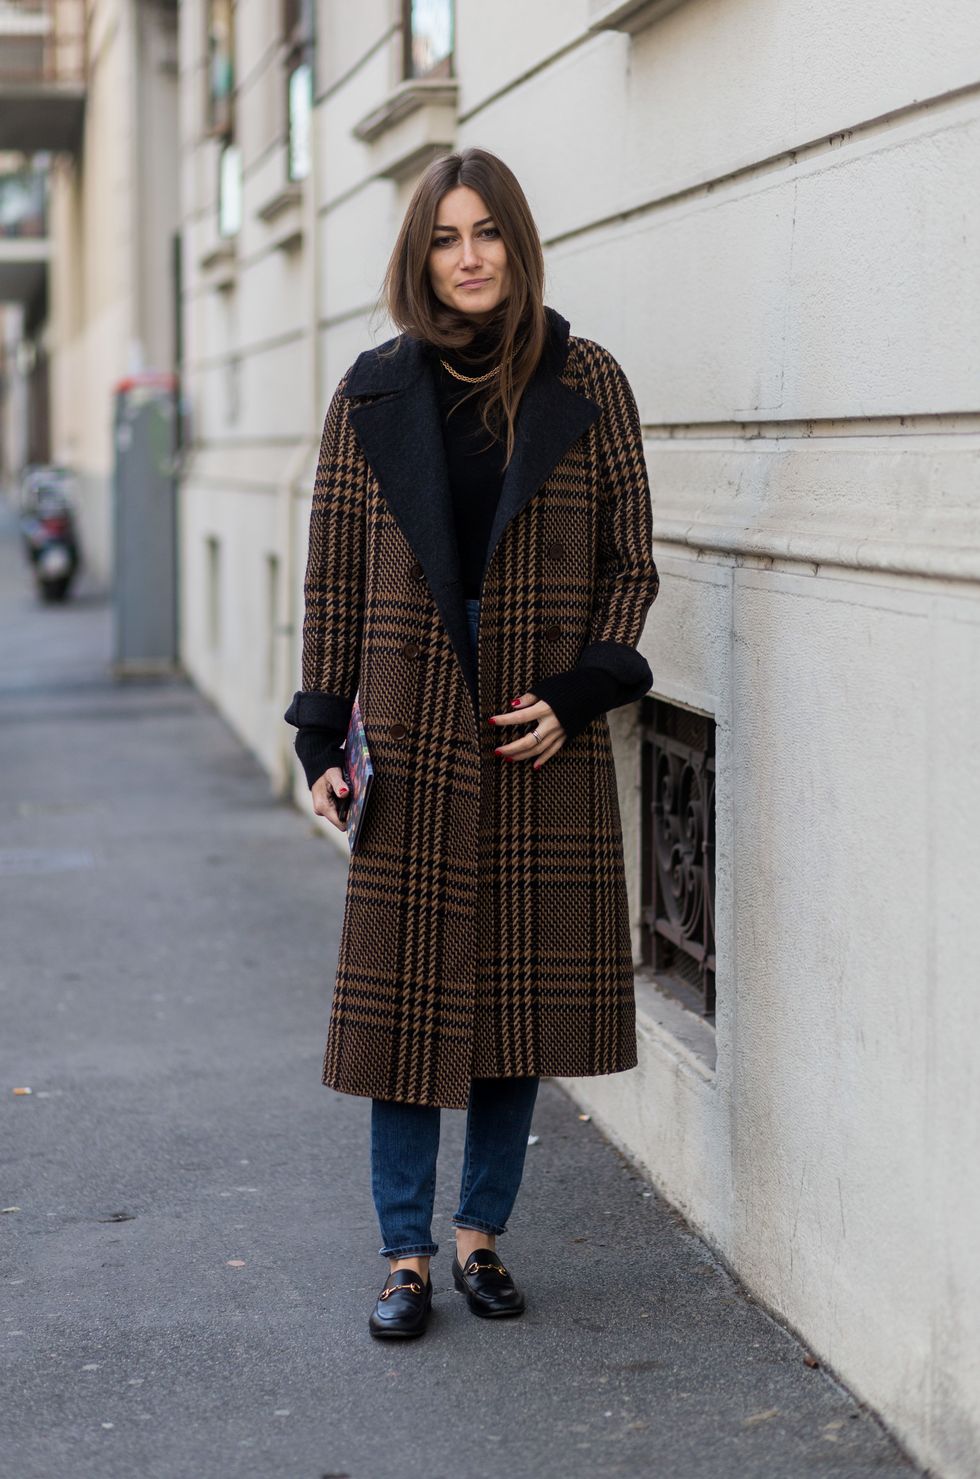 <p>You can't go wrong with a classic black turtleneck and jeans combo for fall, and a menswear-inspired plaid overcoat is the perfect outer layer for cooler days.&nbsp;</p>